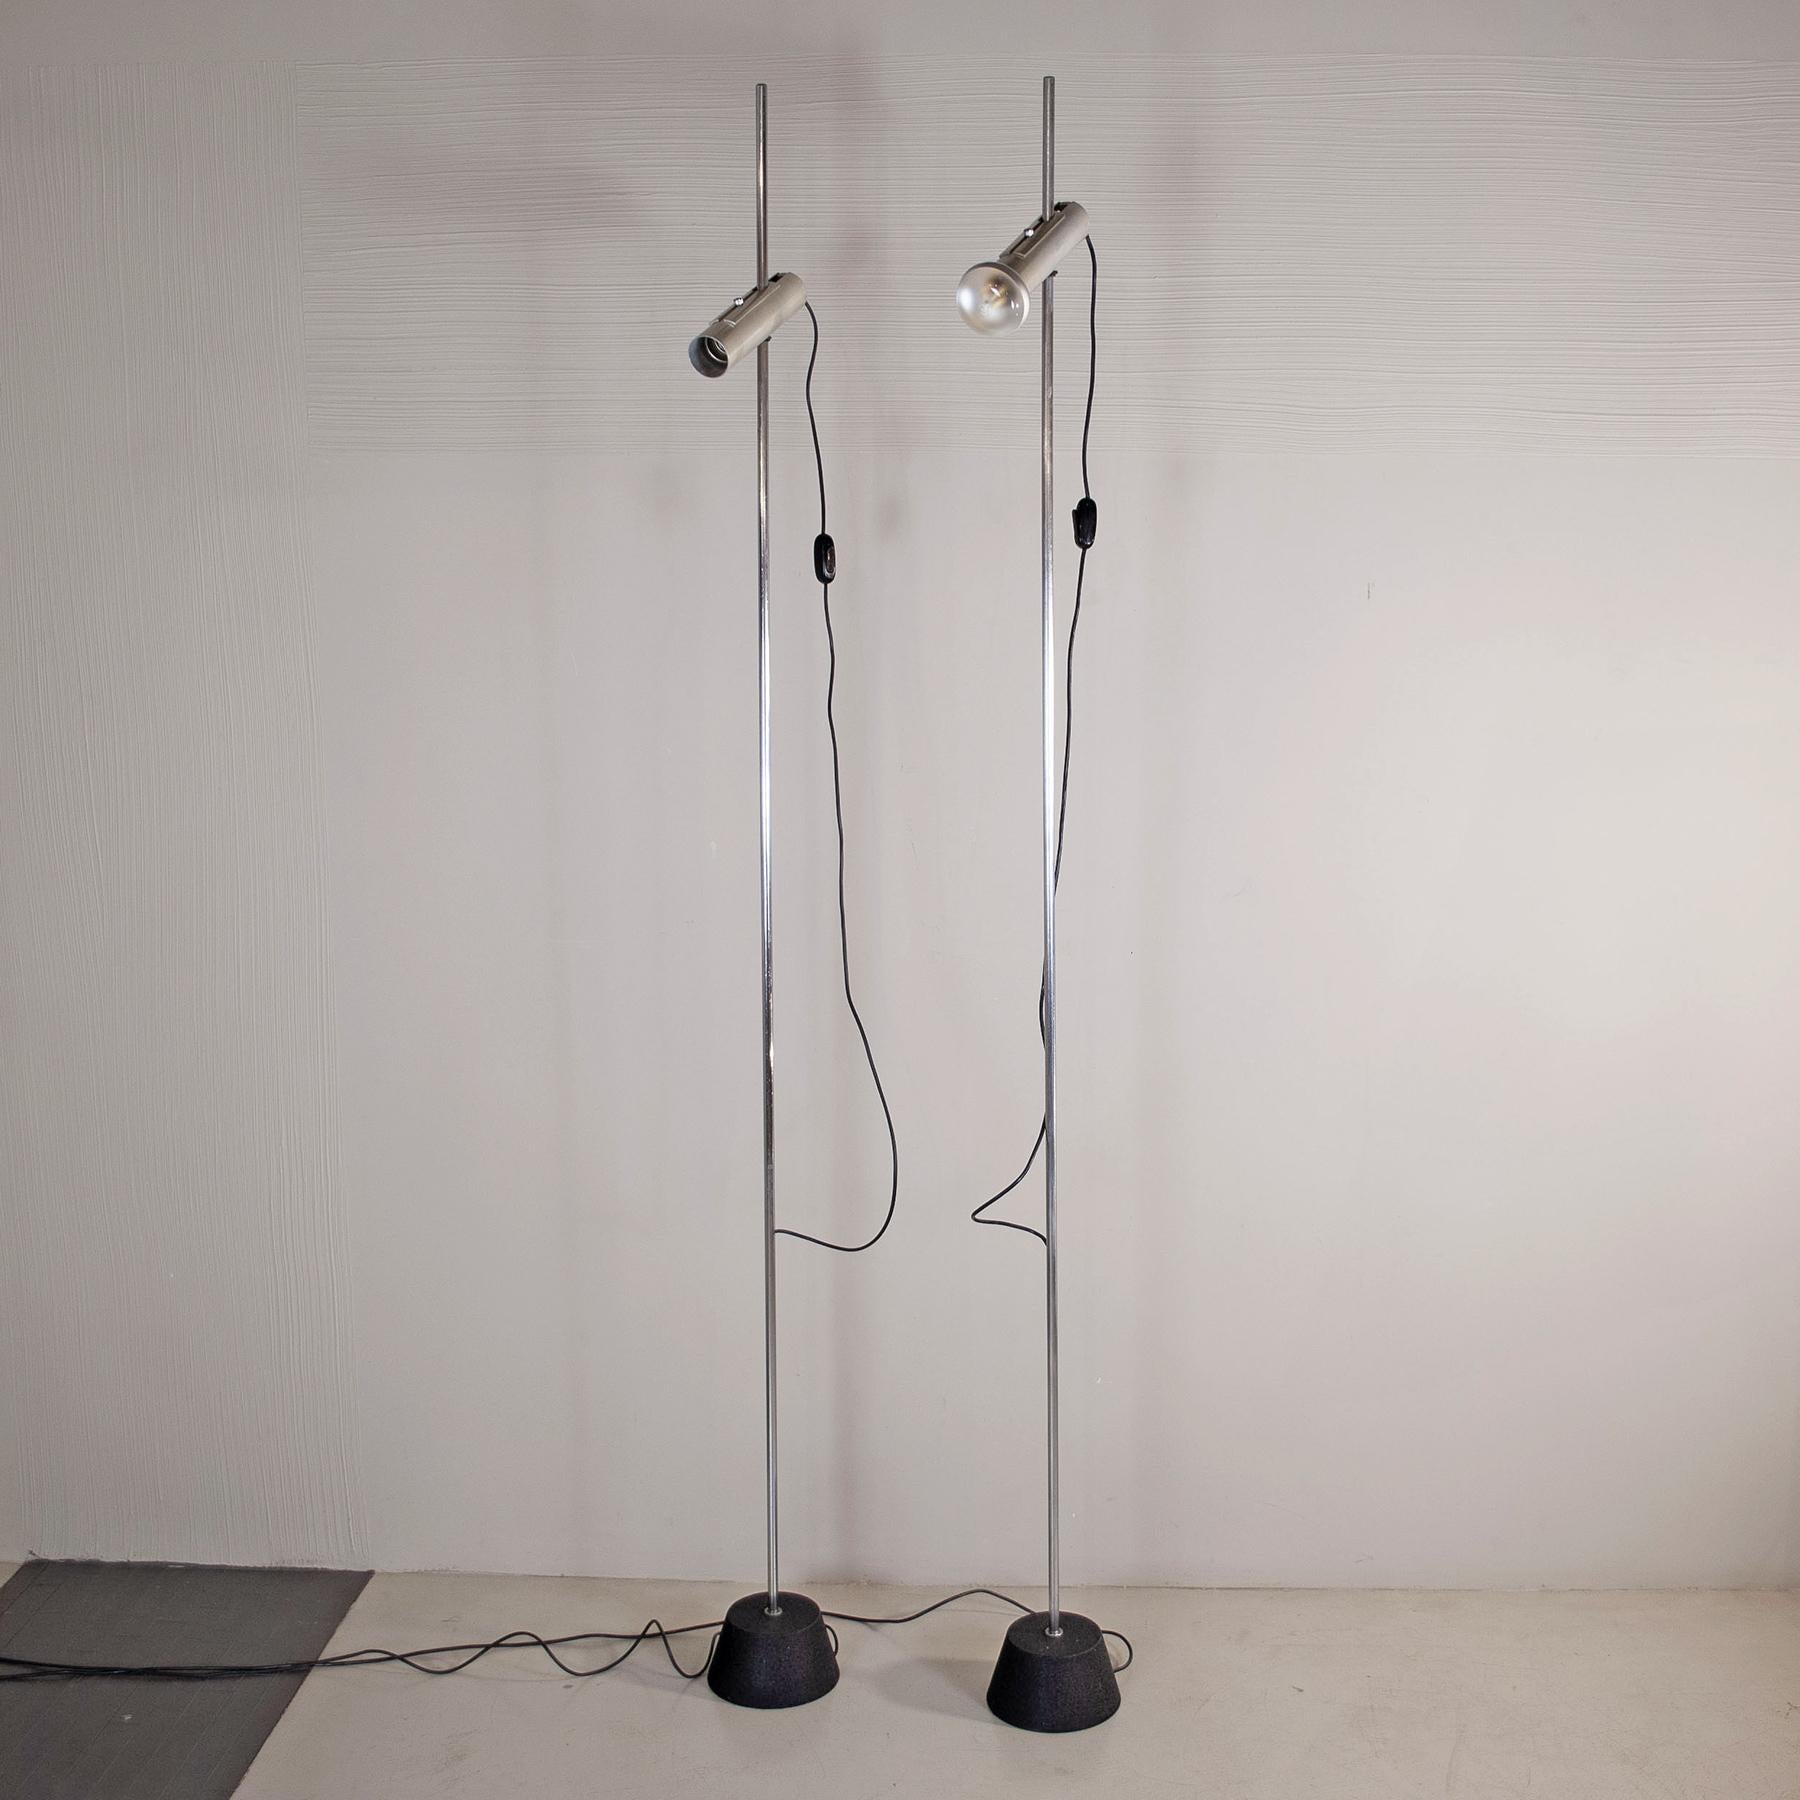 Gino Sarfatti pair of floor lamps model 1074 1950s In Good Condition For Sale In bari, IT